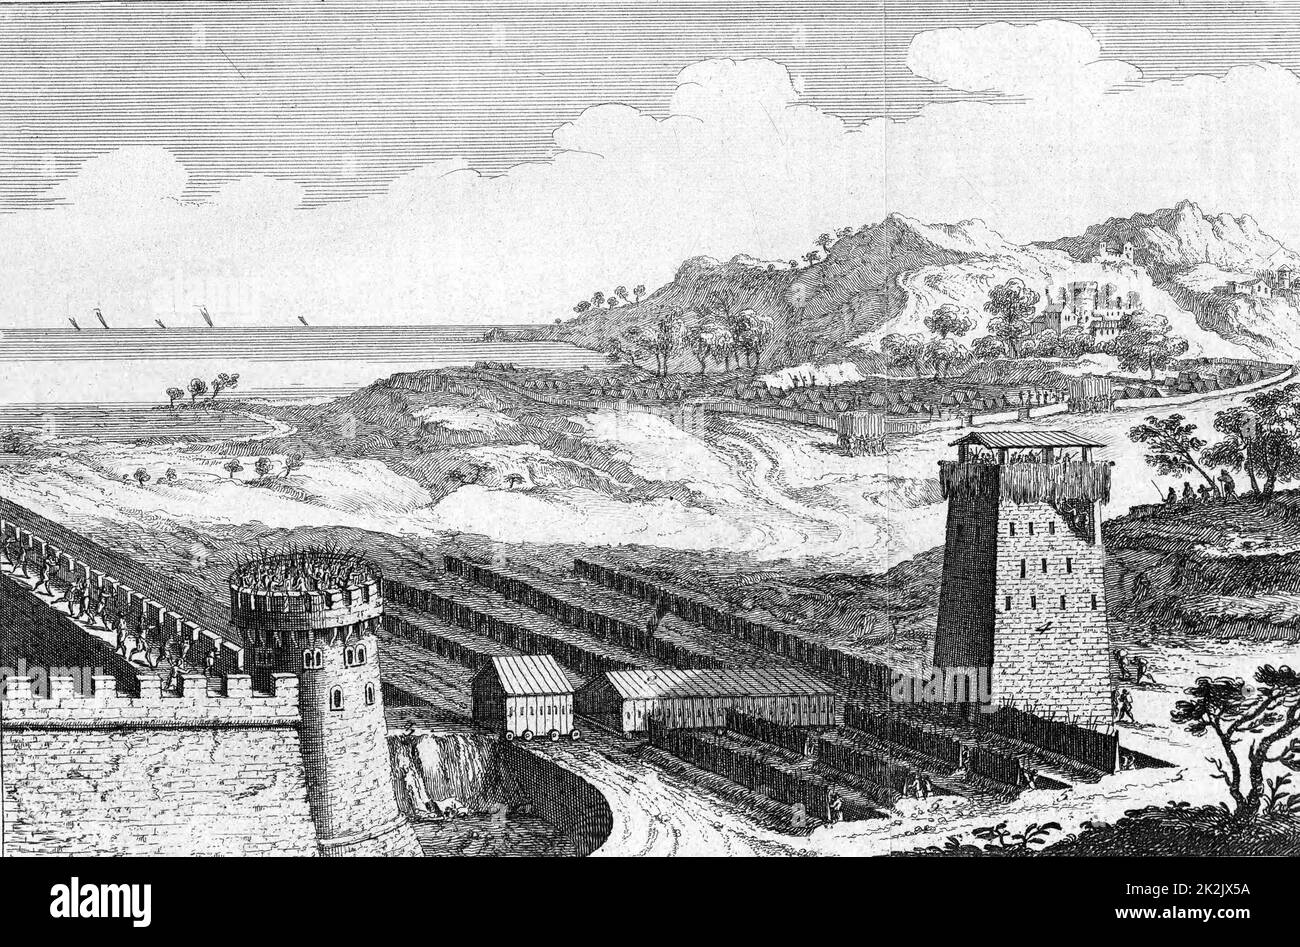 Reconstruction of Julius Caesar's siege of Marseilles (Massilia, in 49 BC), showing the musculus or covered way to protect engineers approaching walls of besieged city. 18th century engraving Stock Photo